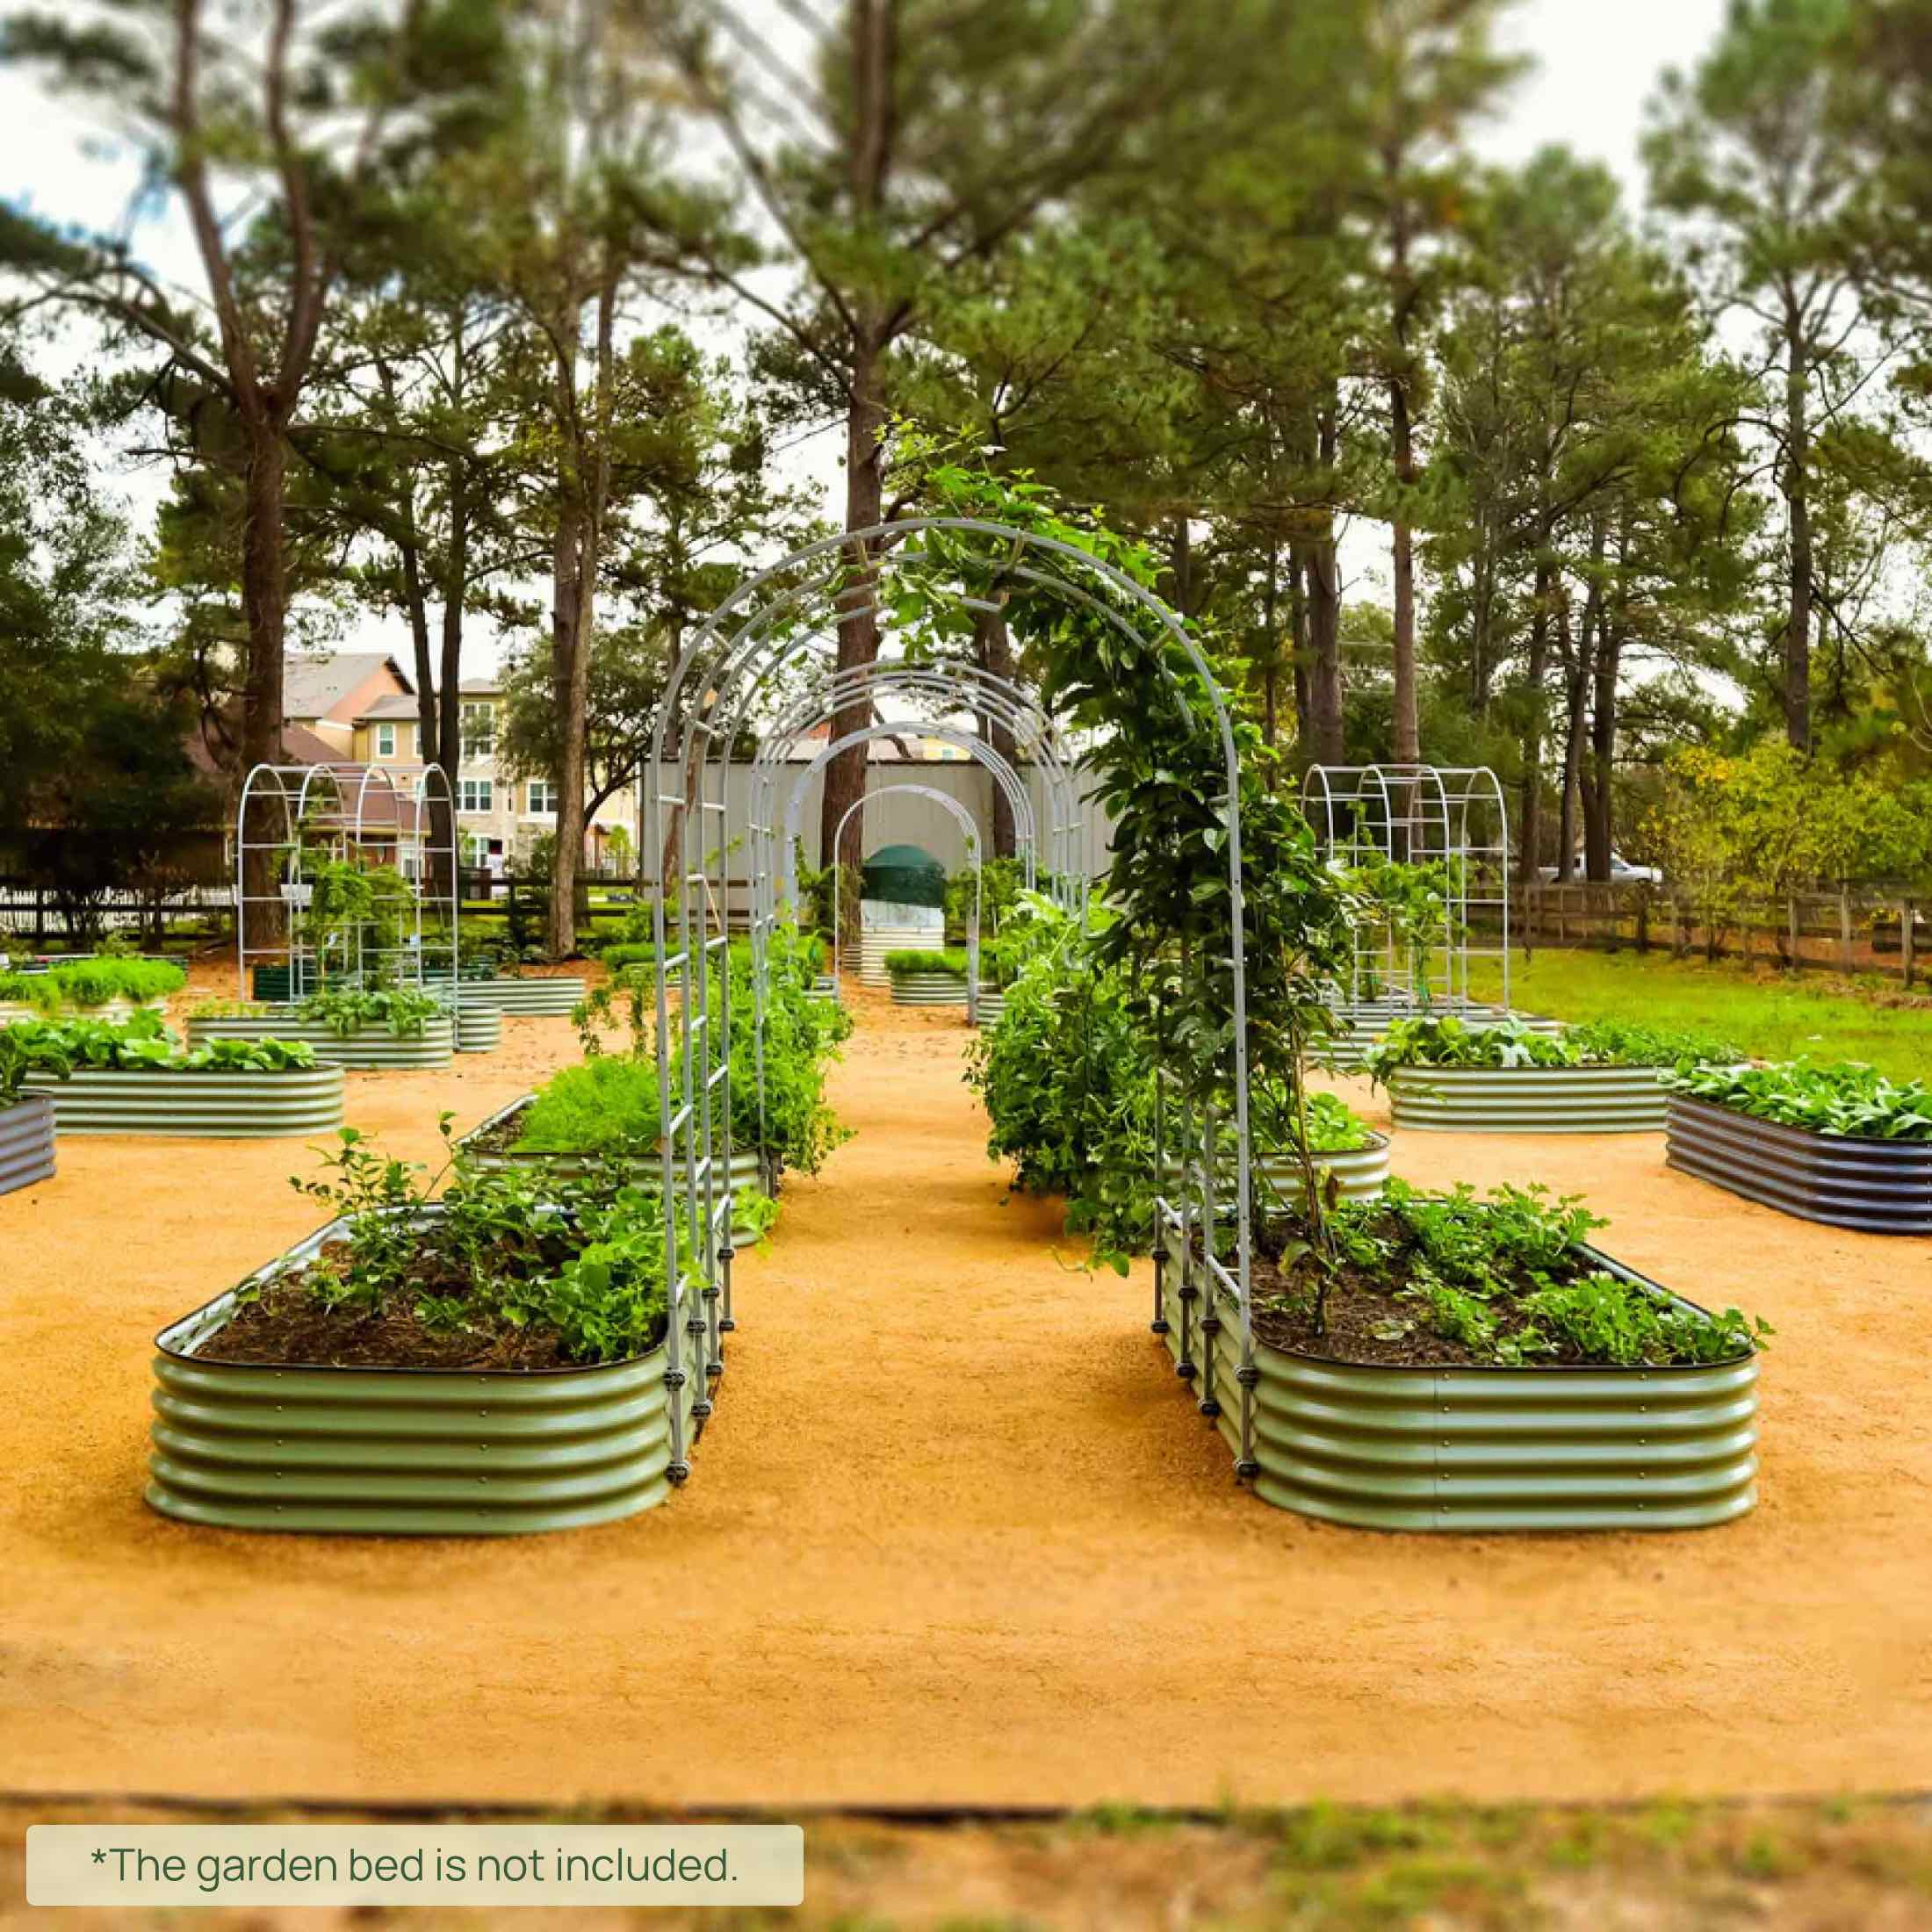 Arched Trellis System